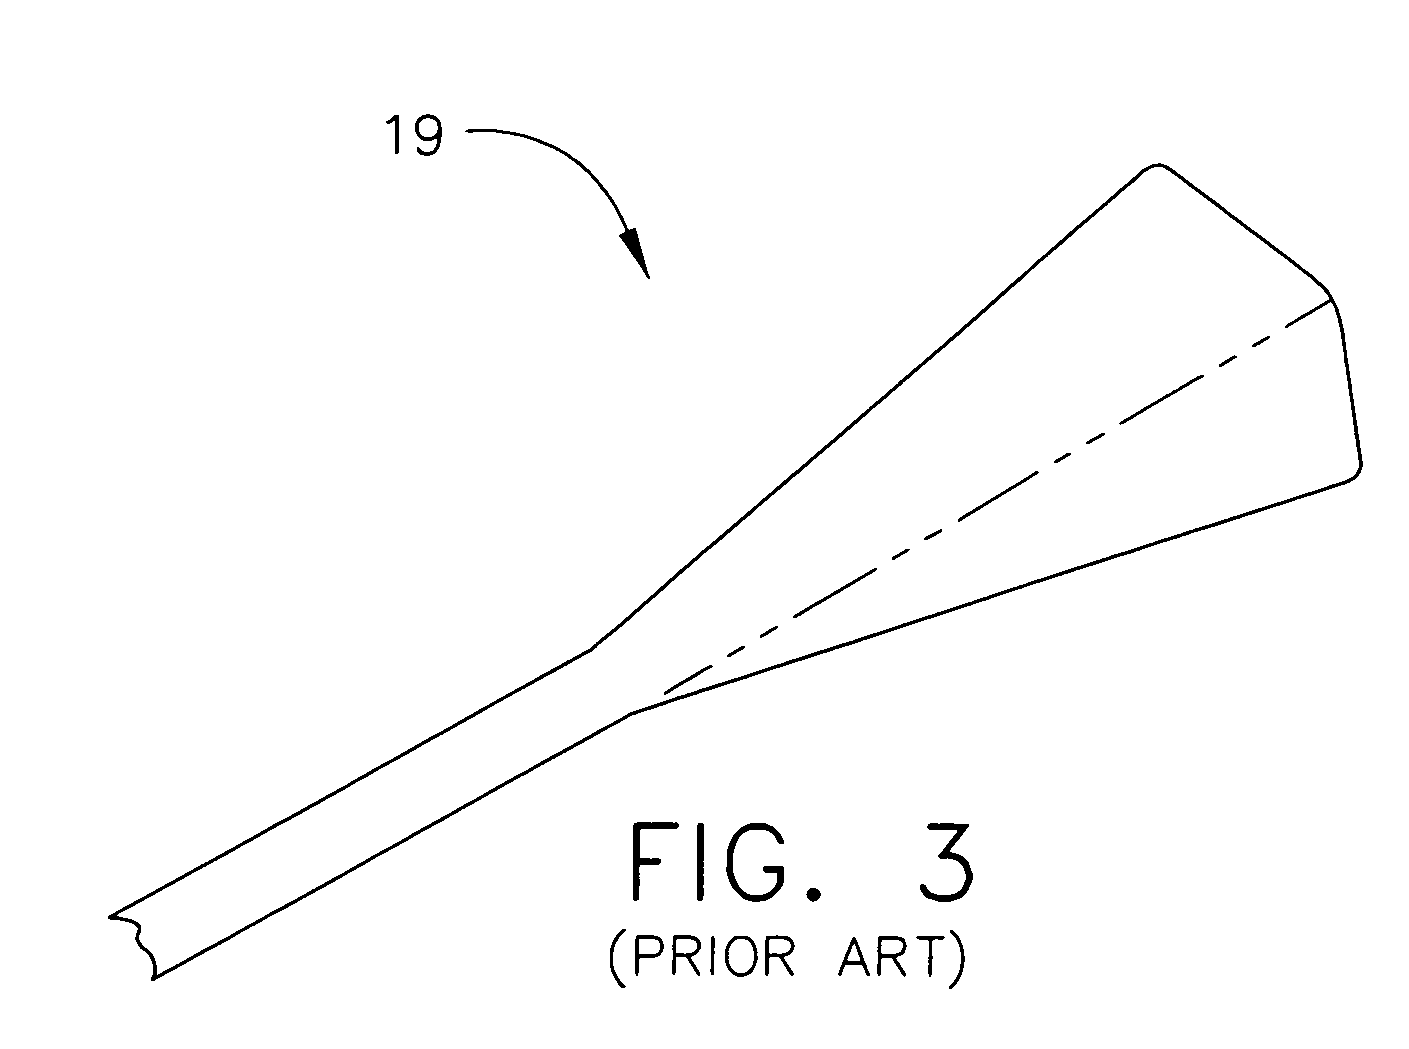 Bell-shaped fan cooling holes for turbine airfoil